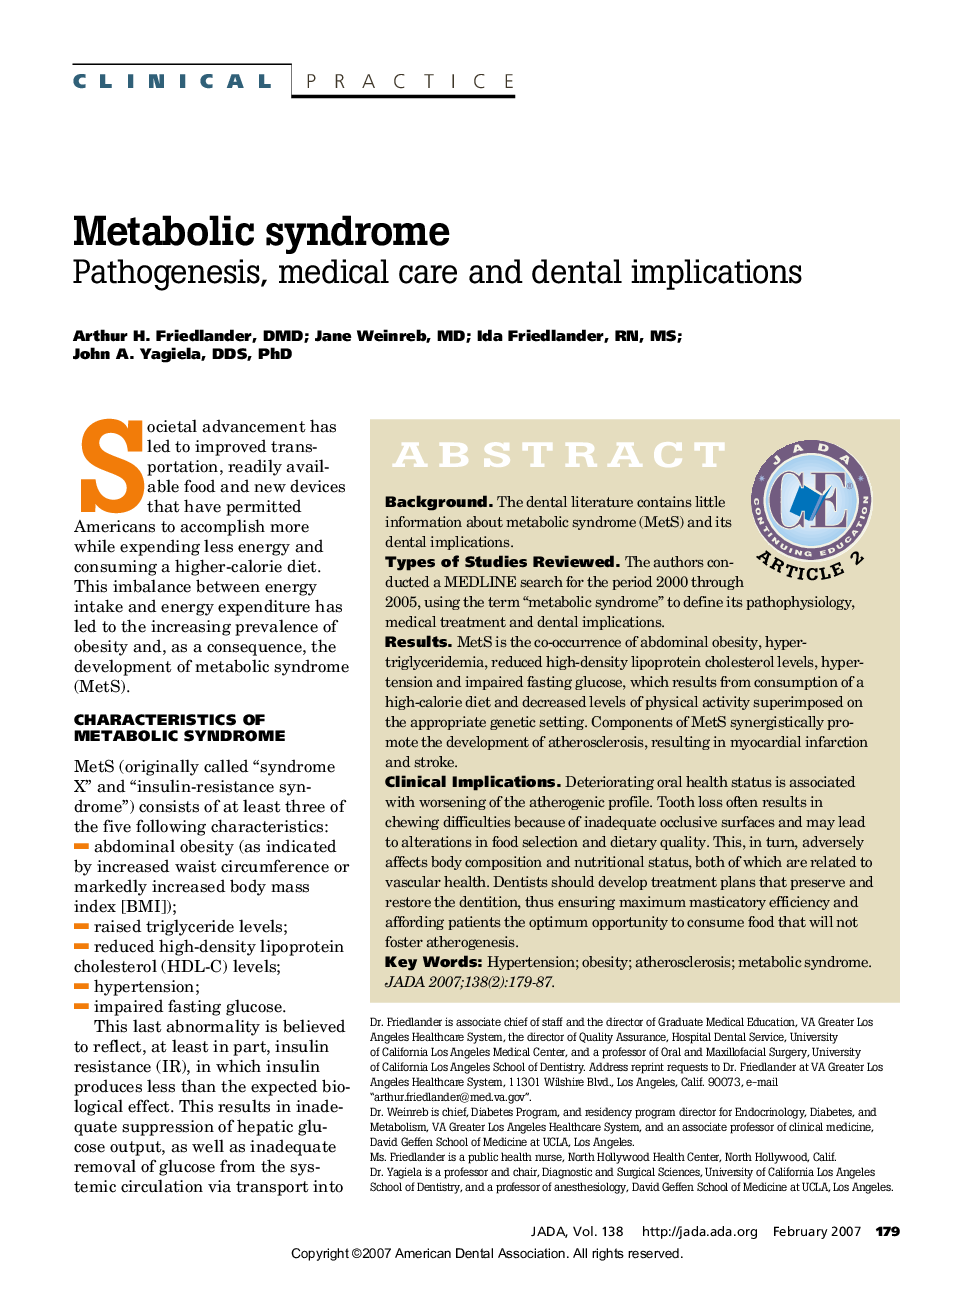 Metabolic syndrome: Pathogenesis, medical care and dental implications